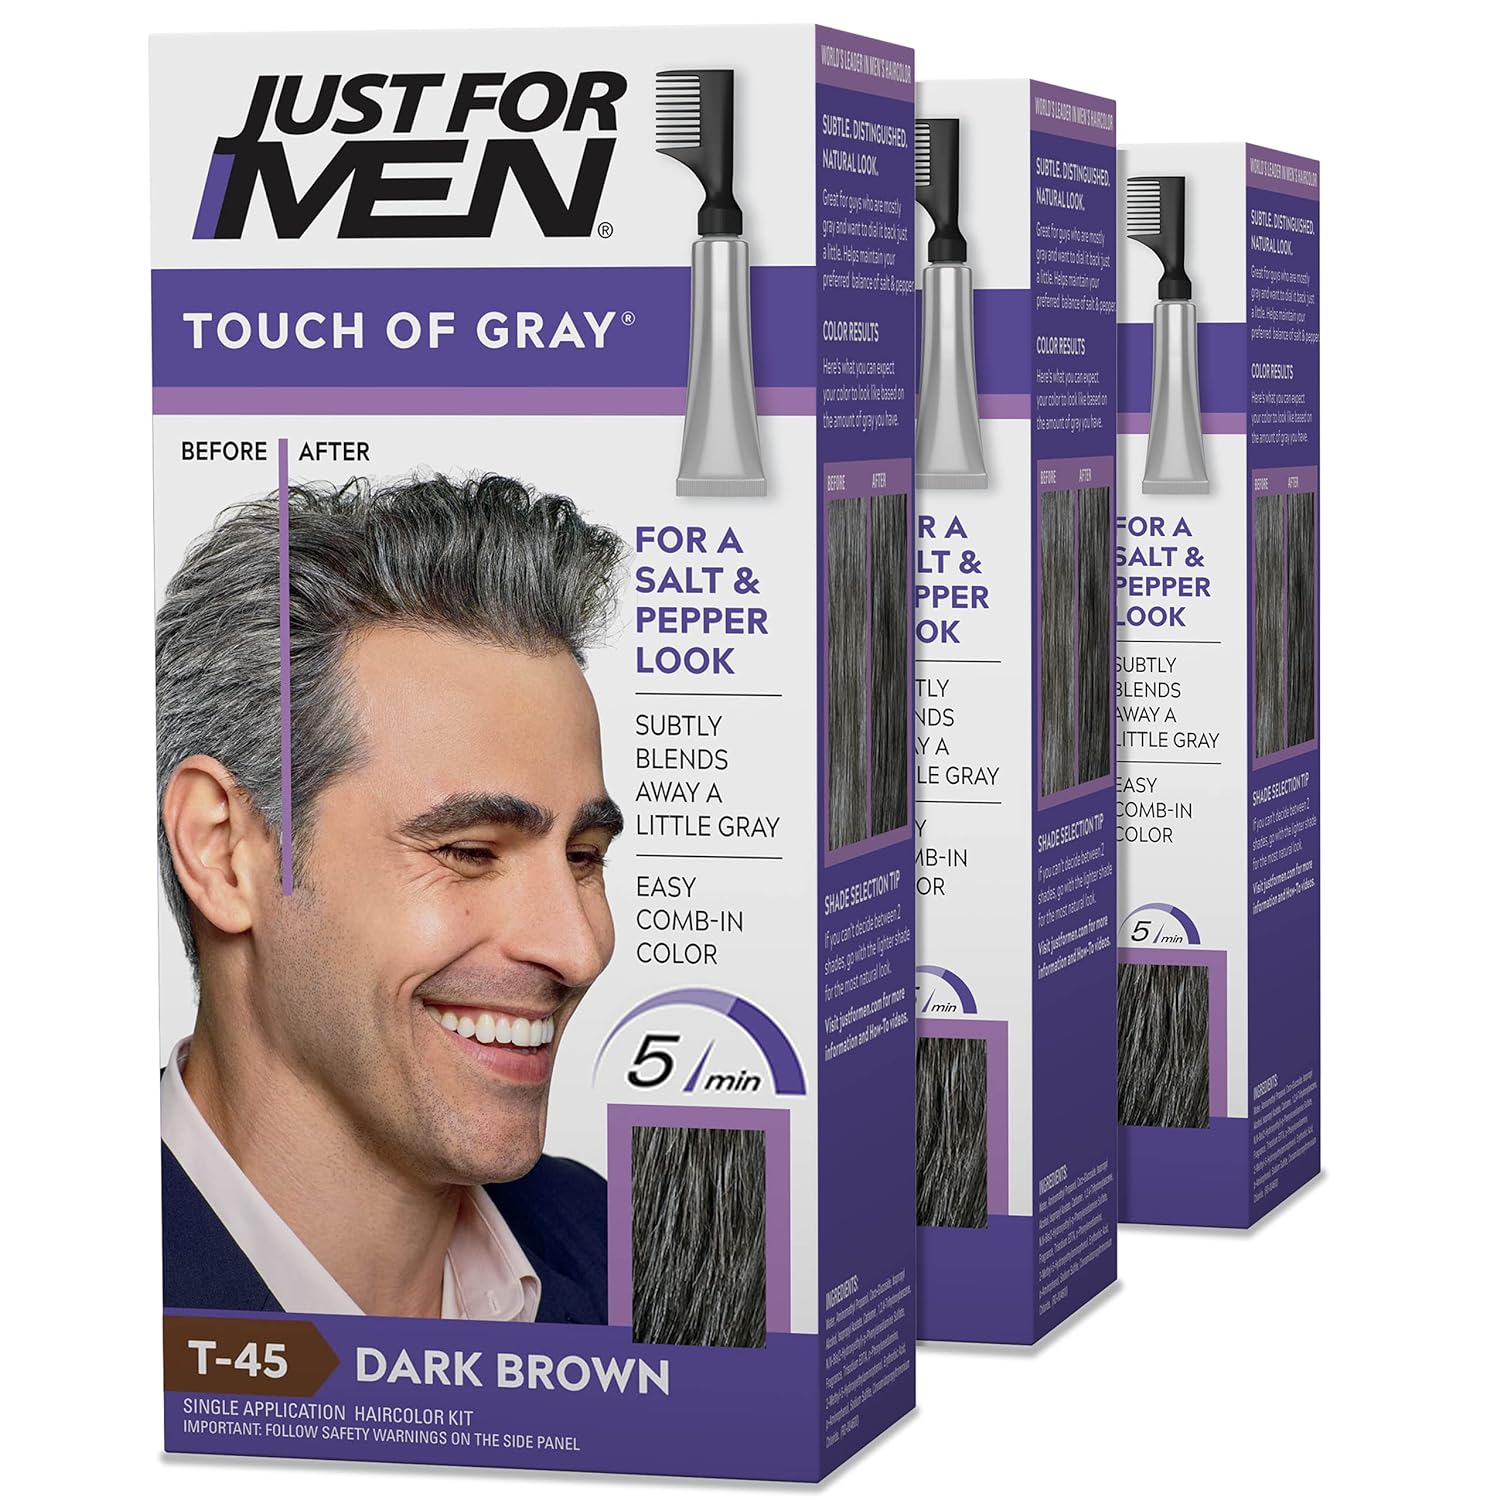 Just For Men Touch of Gray, Gray Hair Coloring for Men 